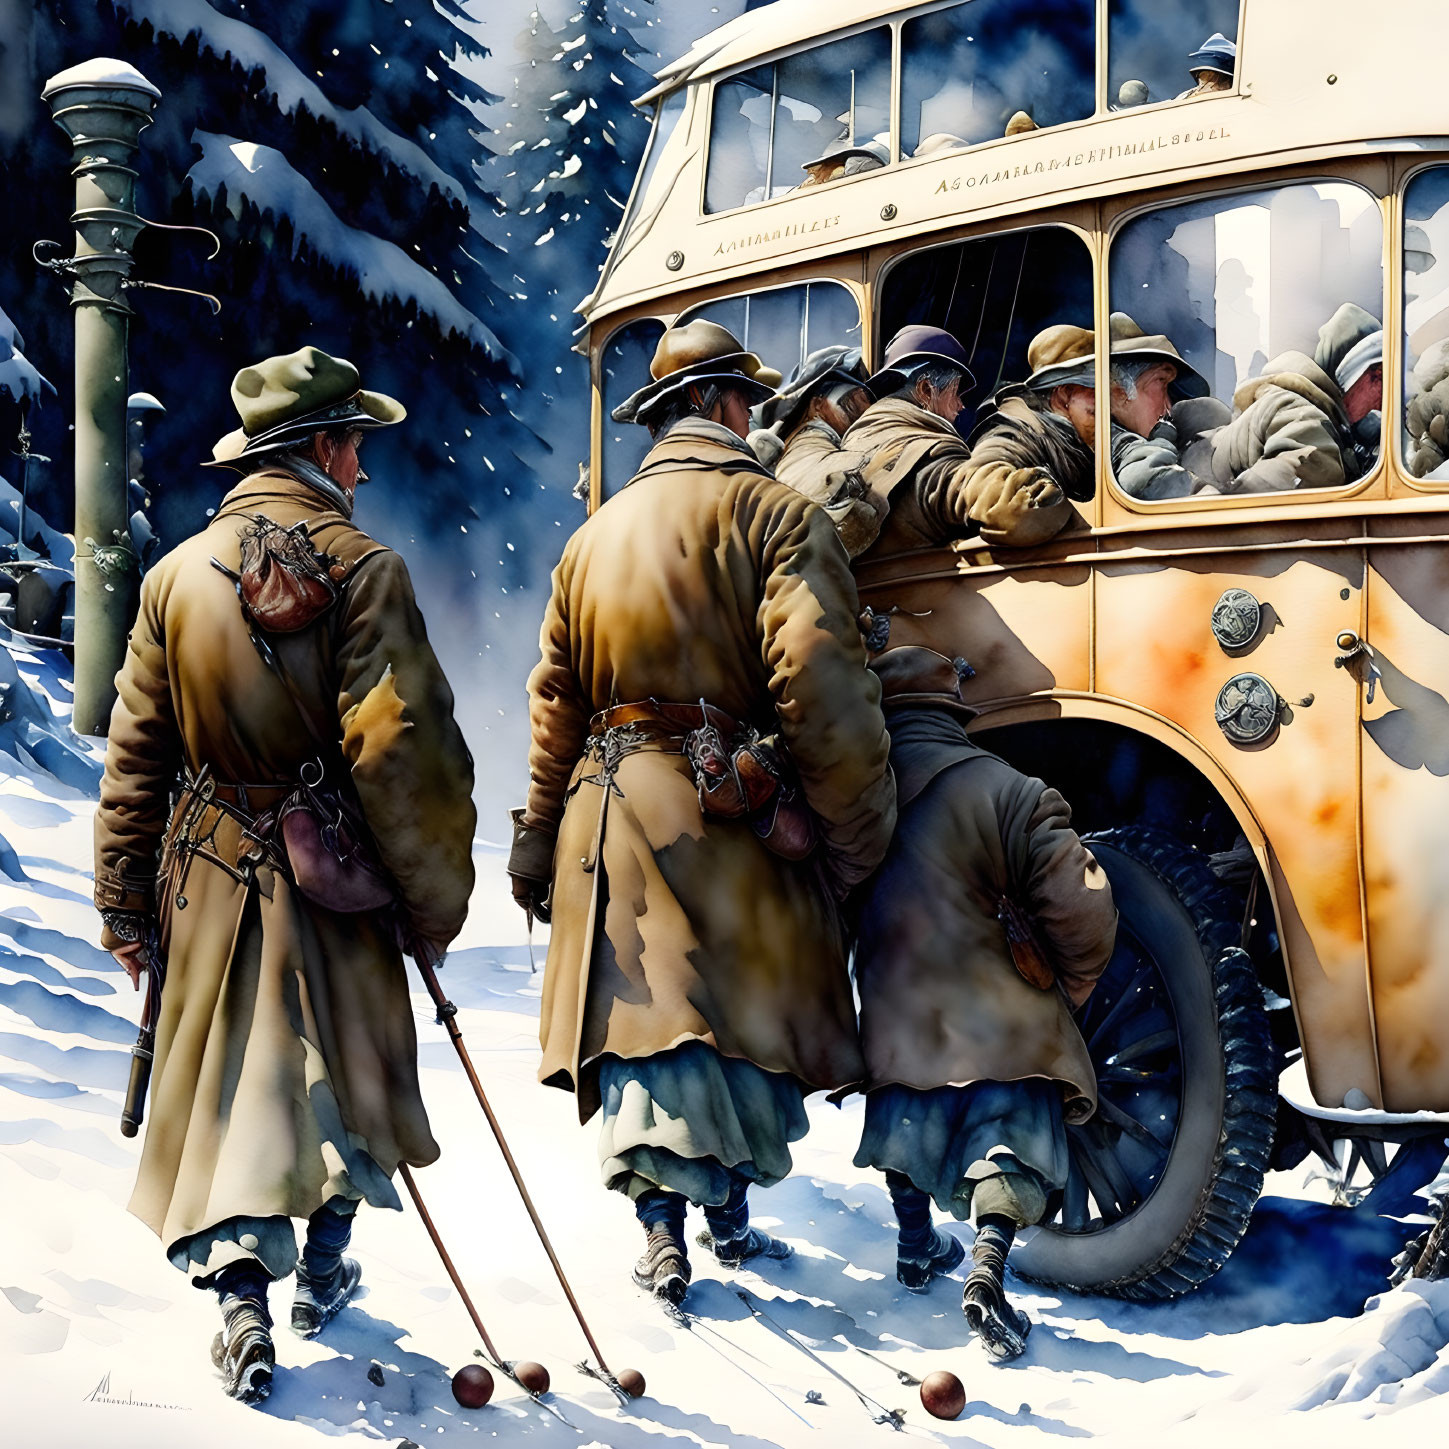 Winter scene, people getting into a bus